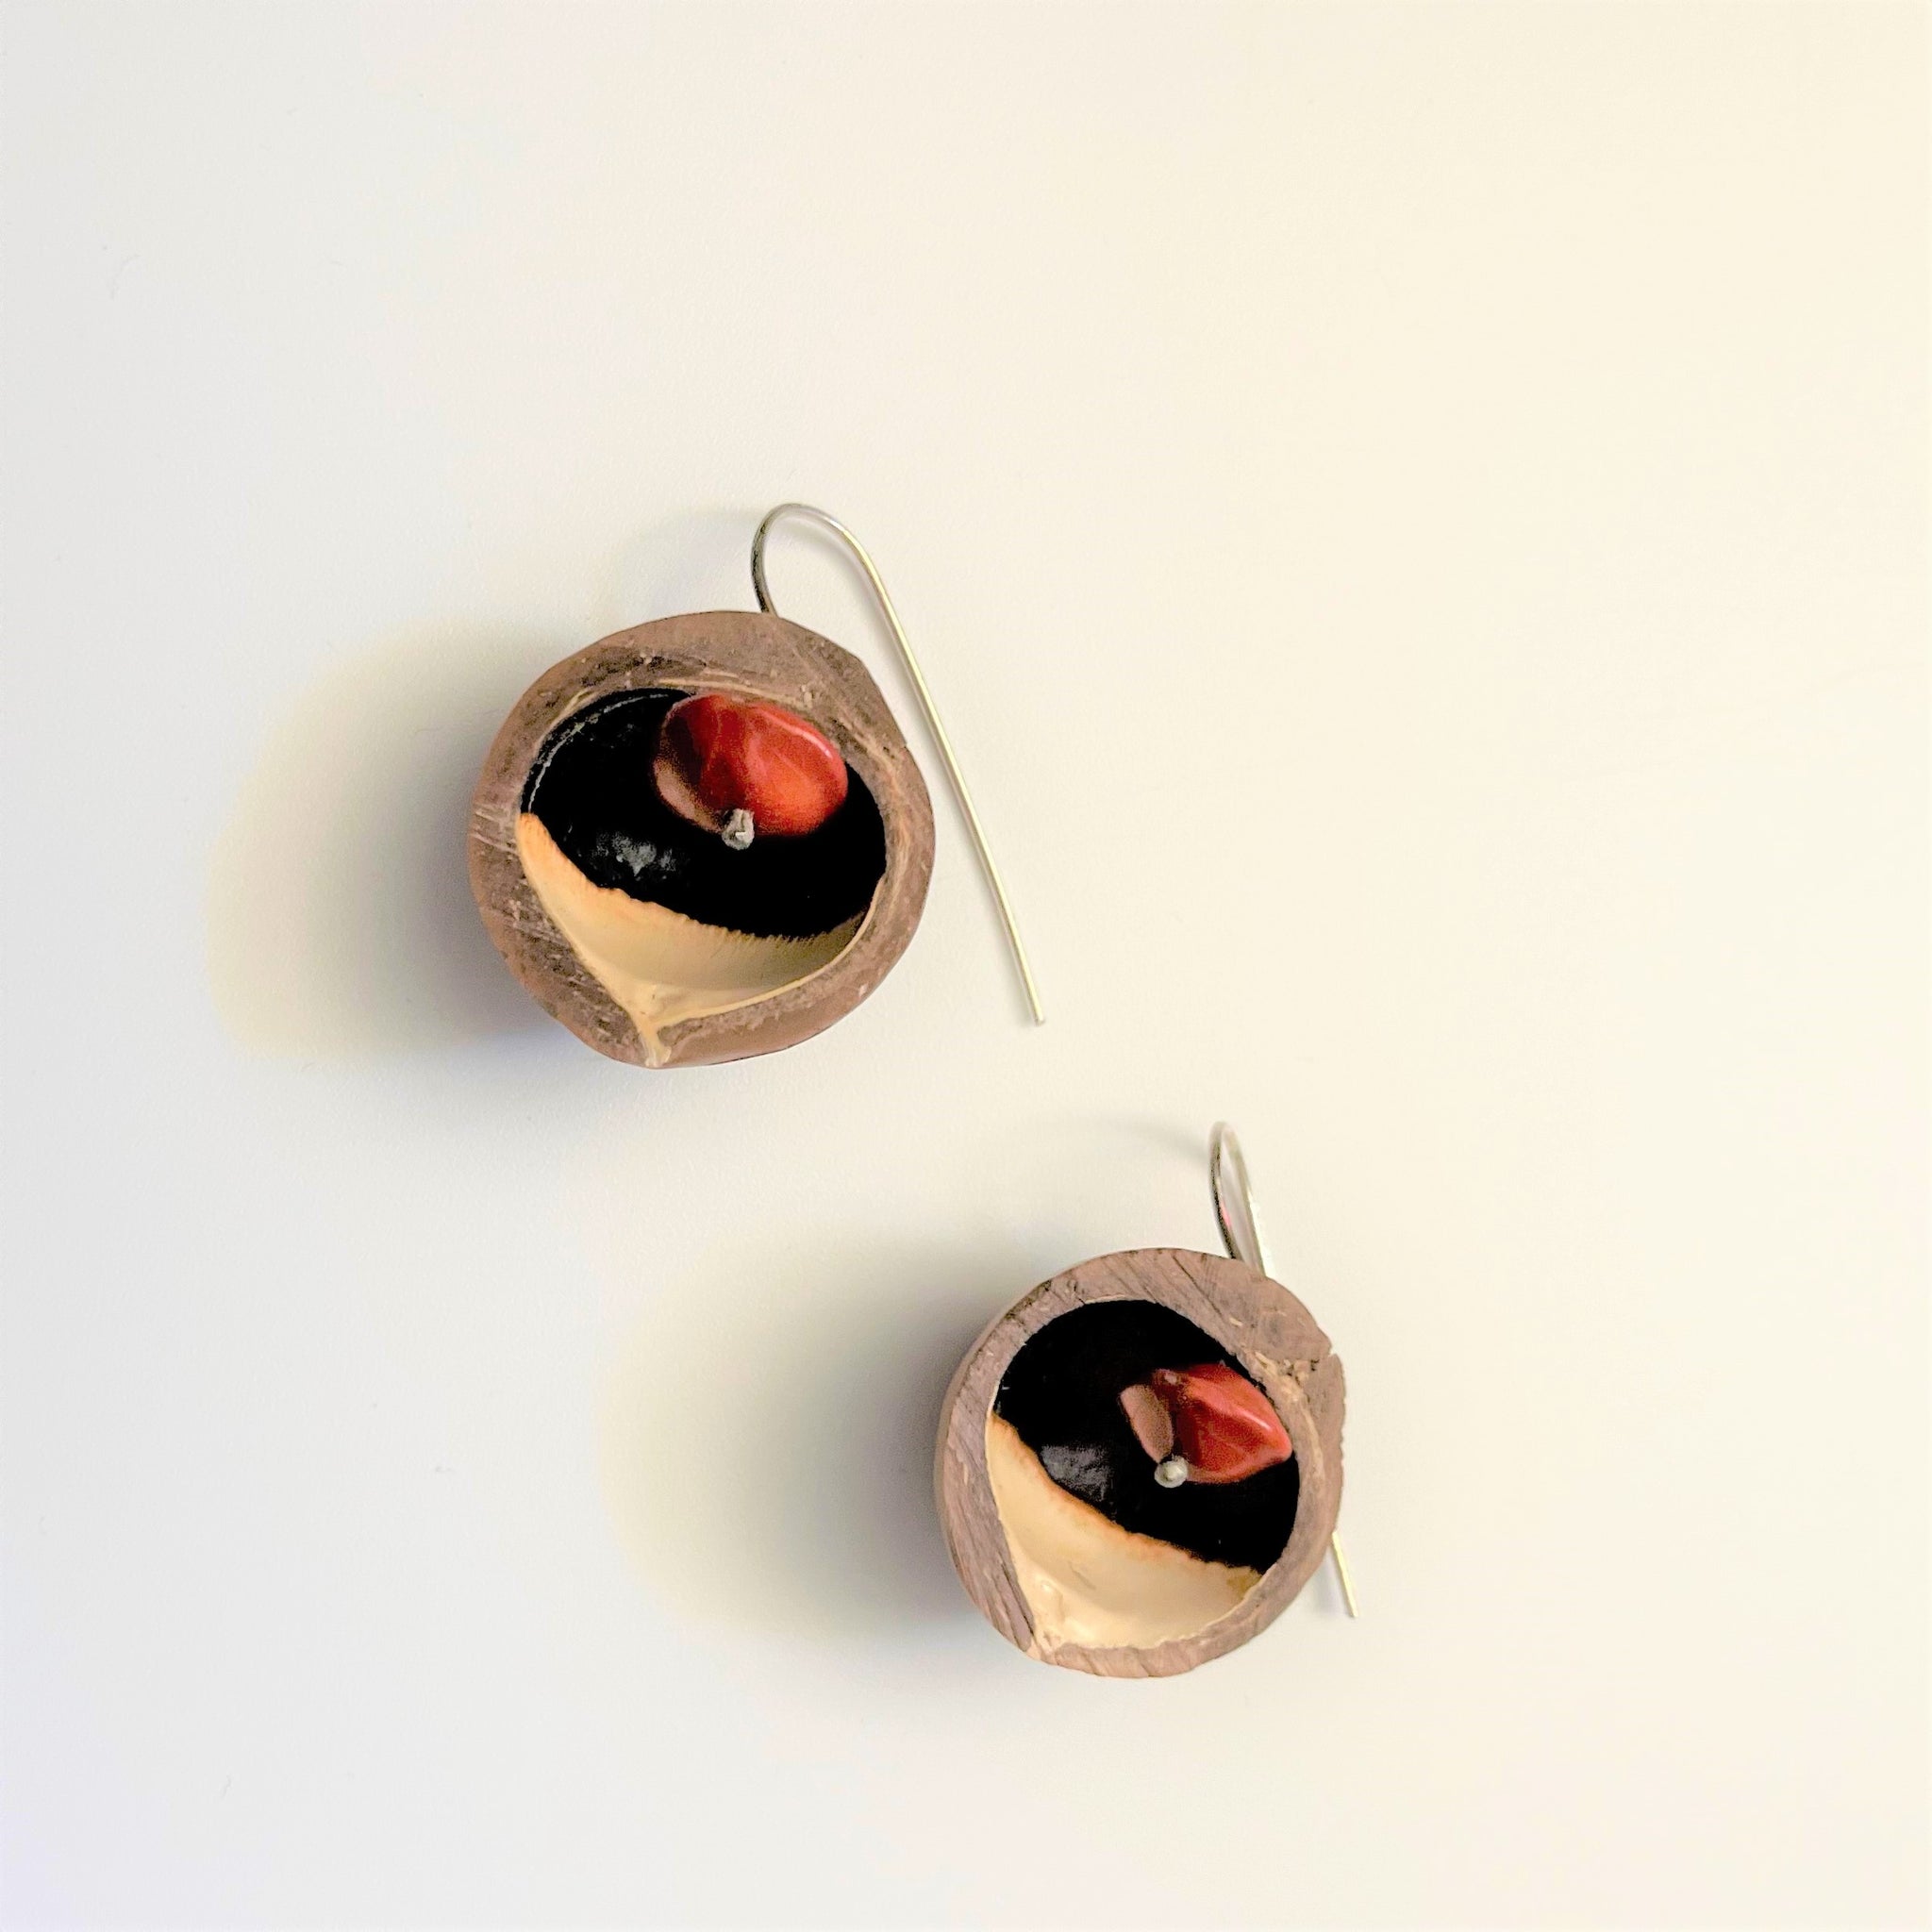 Sultana Shamshi - Macadamia Nut with red bead and Sterling Silver Hook Earrings (ssh010)